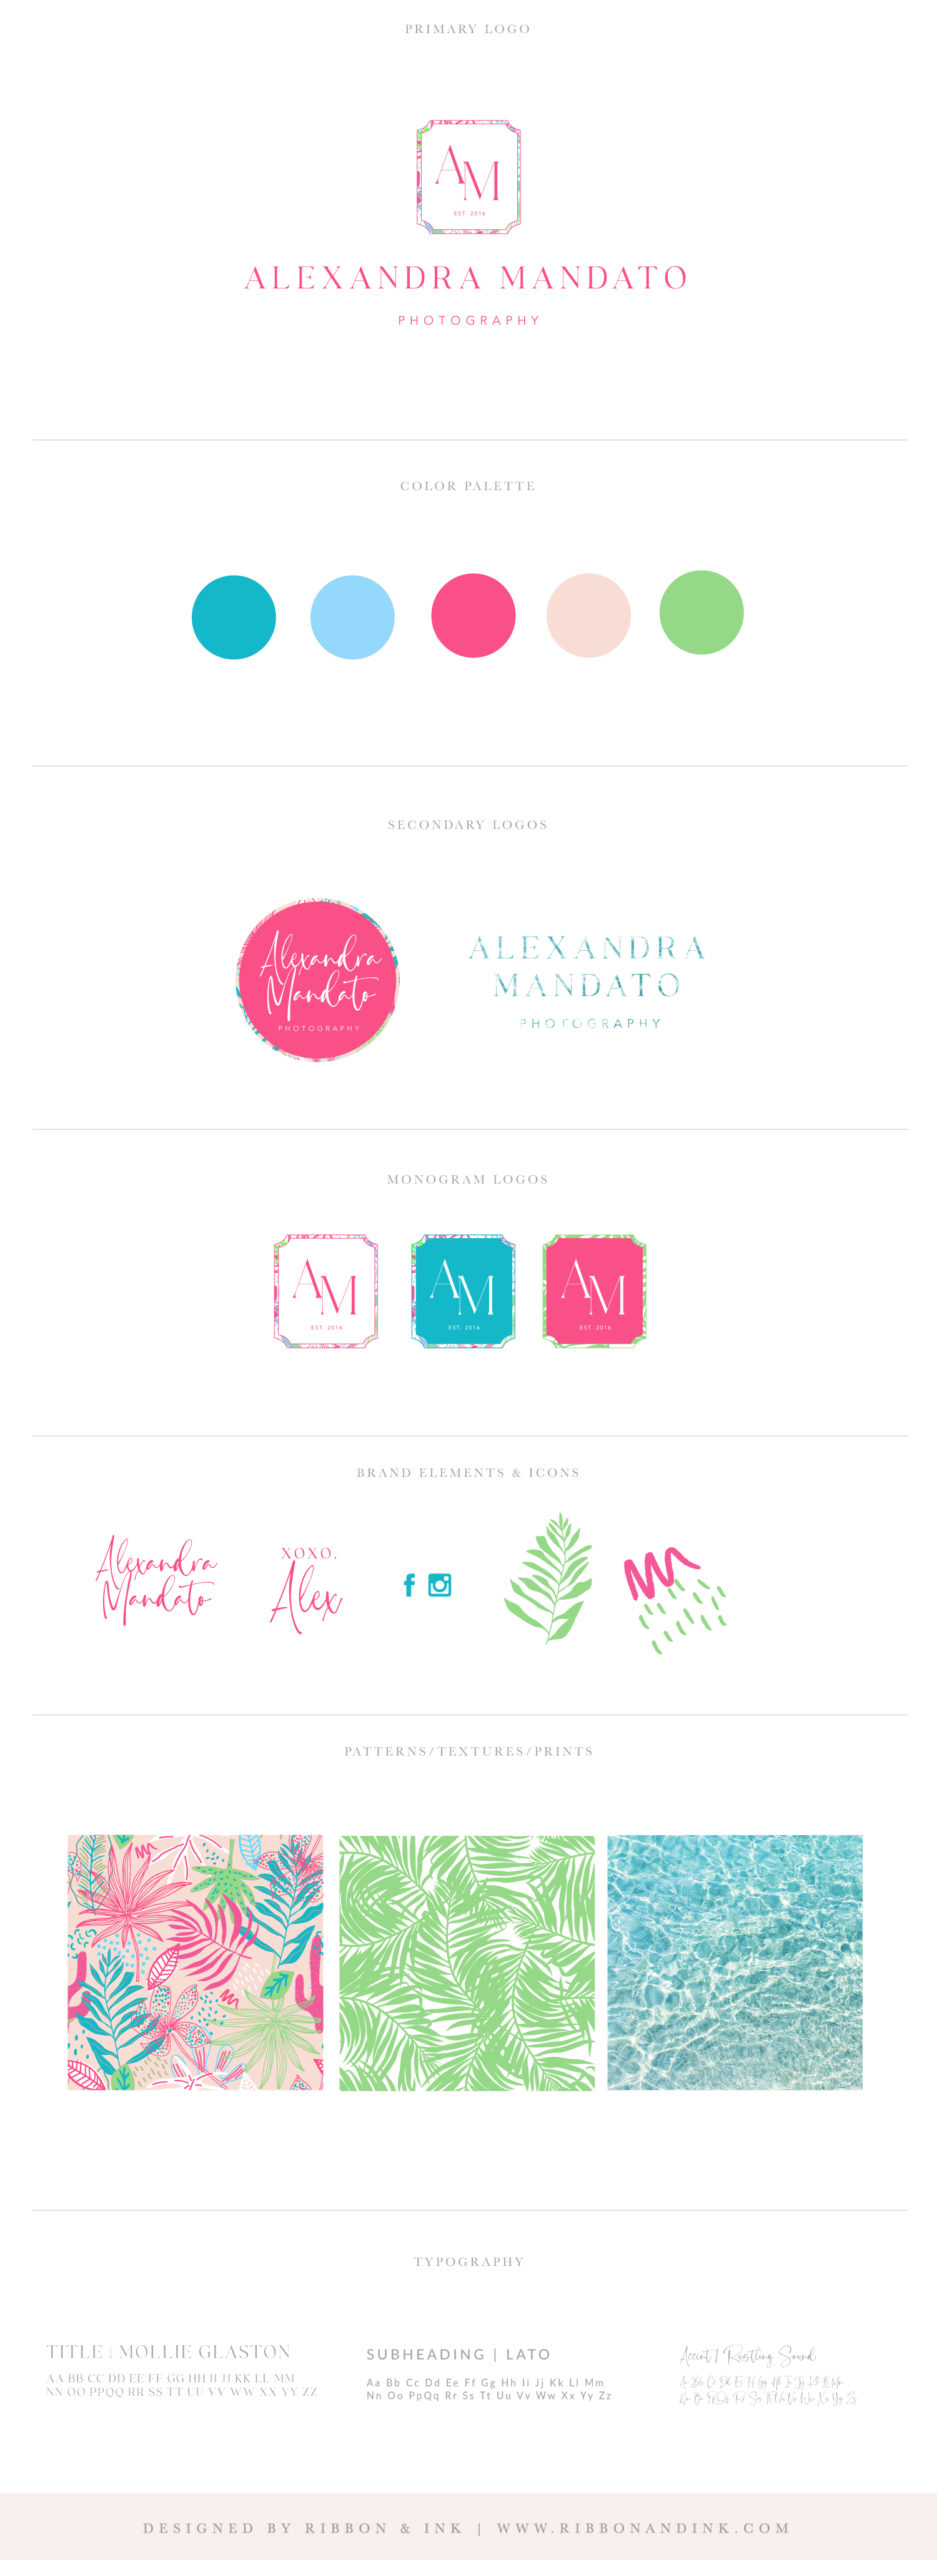 branding for photographers / branding for wedding businesses / brand board / brand identity / bright and bold design / colorful / logo